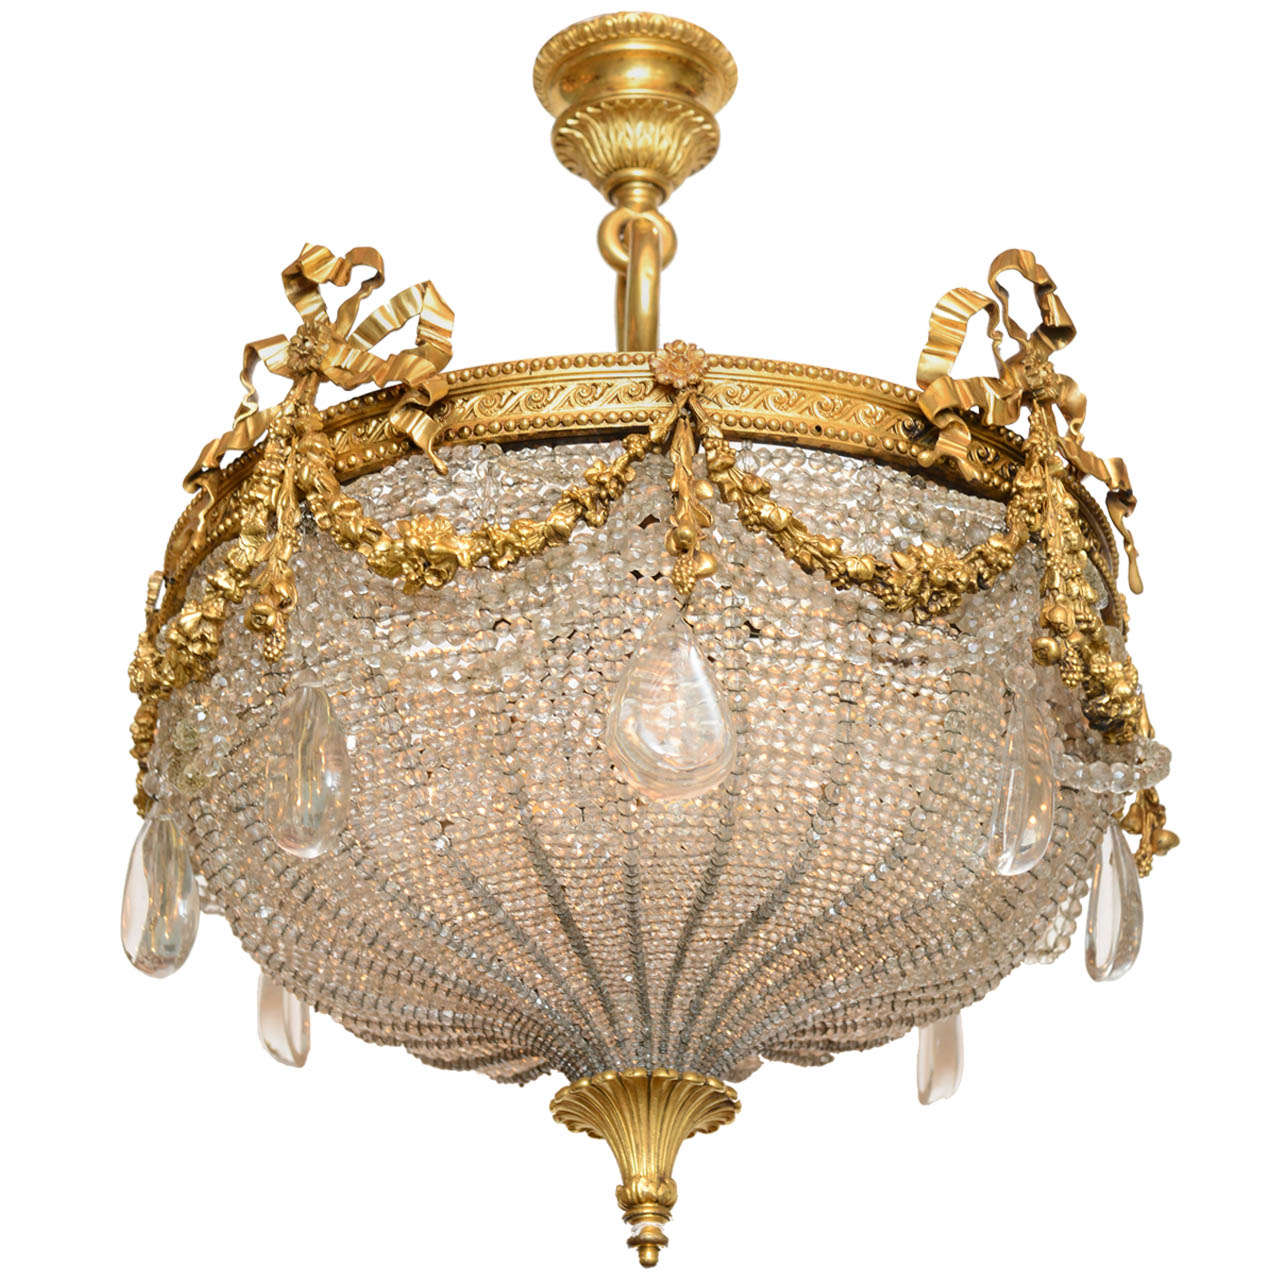 A Beautiful Gilt Bronze Ribboned and Wreath Beaded Chandelier by E. F. Caldwell